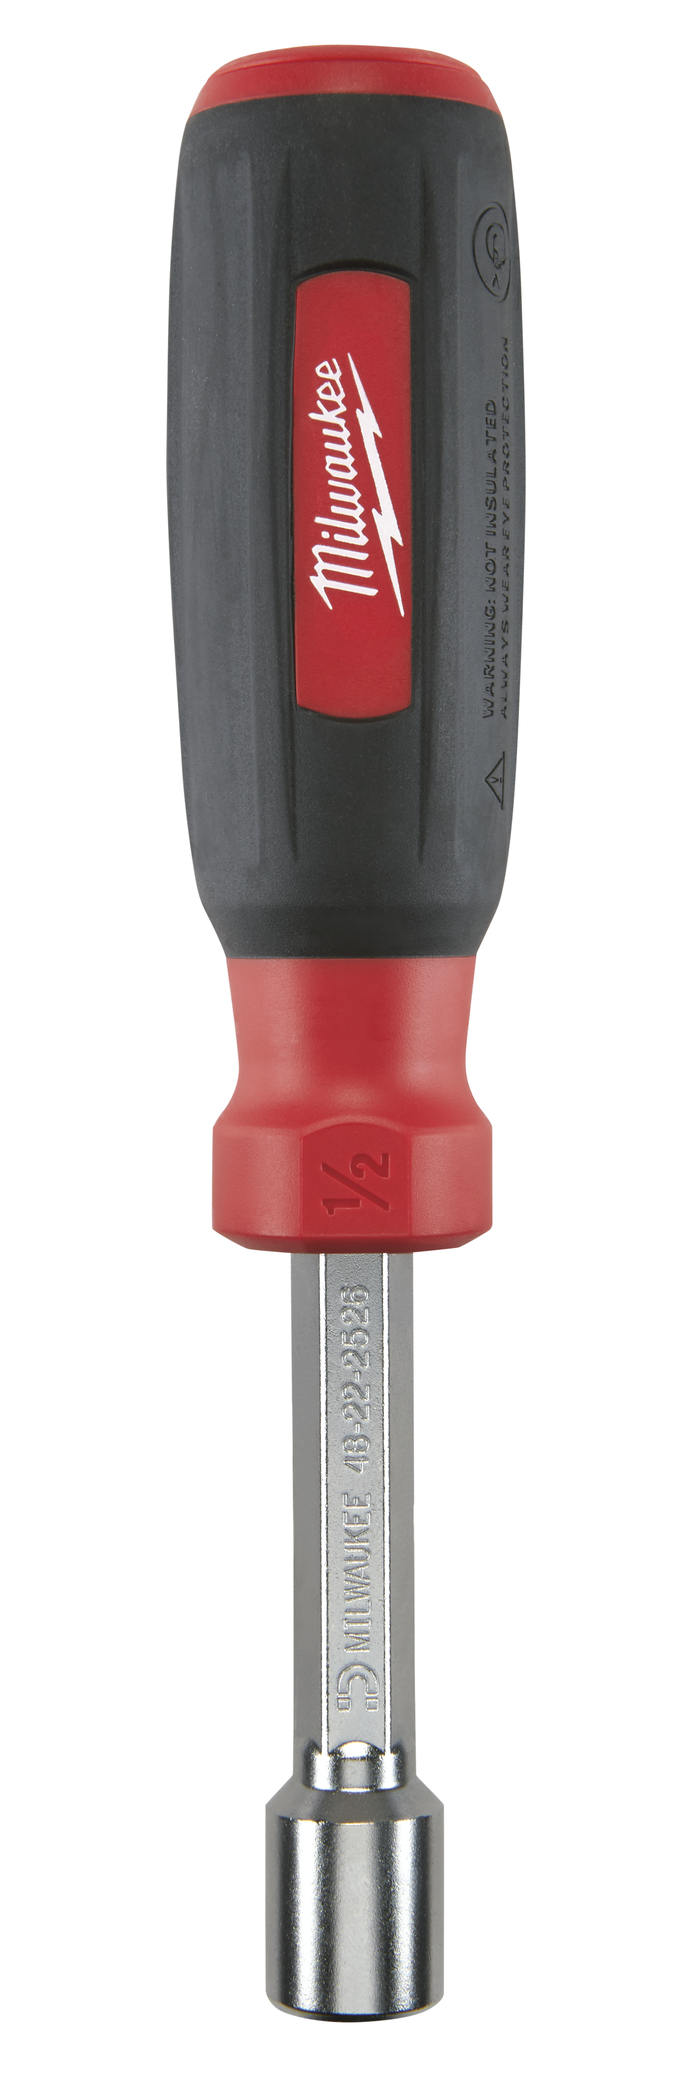 1/2 in. HollowCore Magnetic Nut Driver